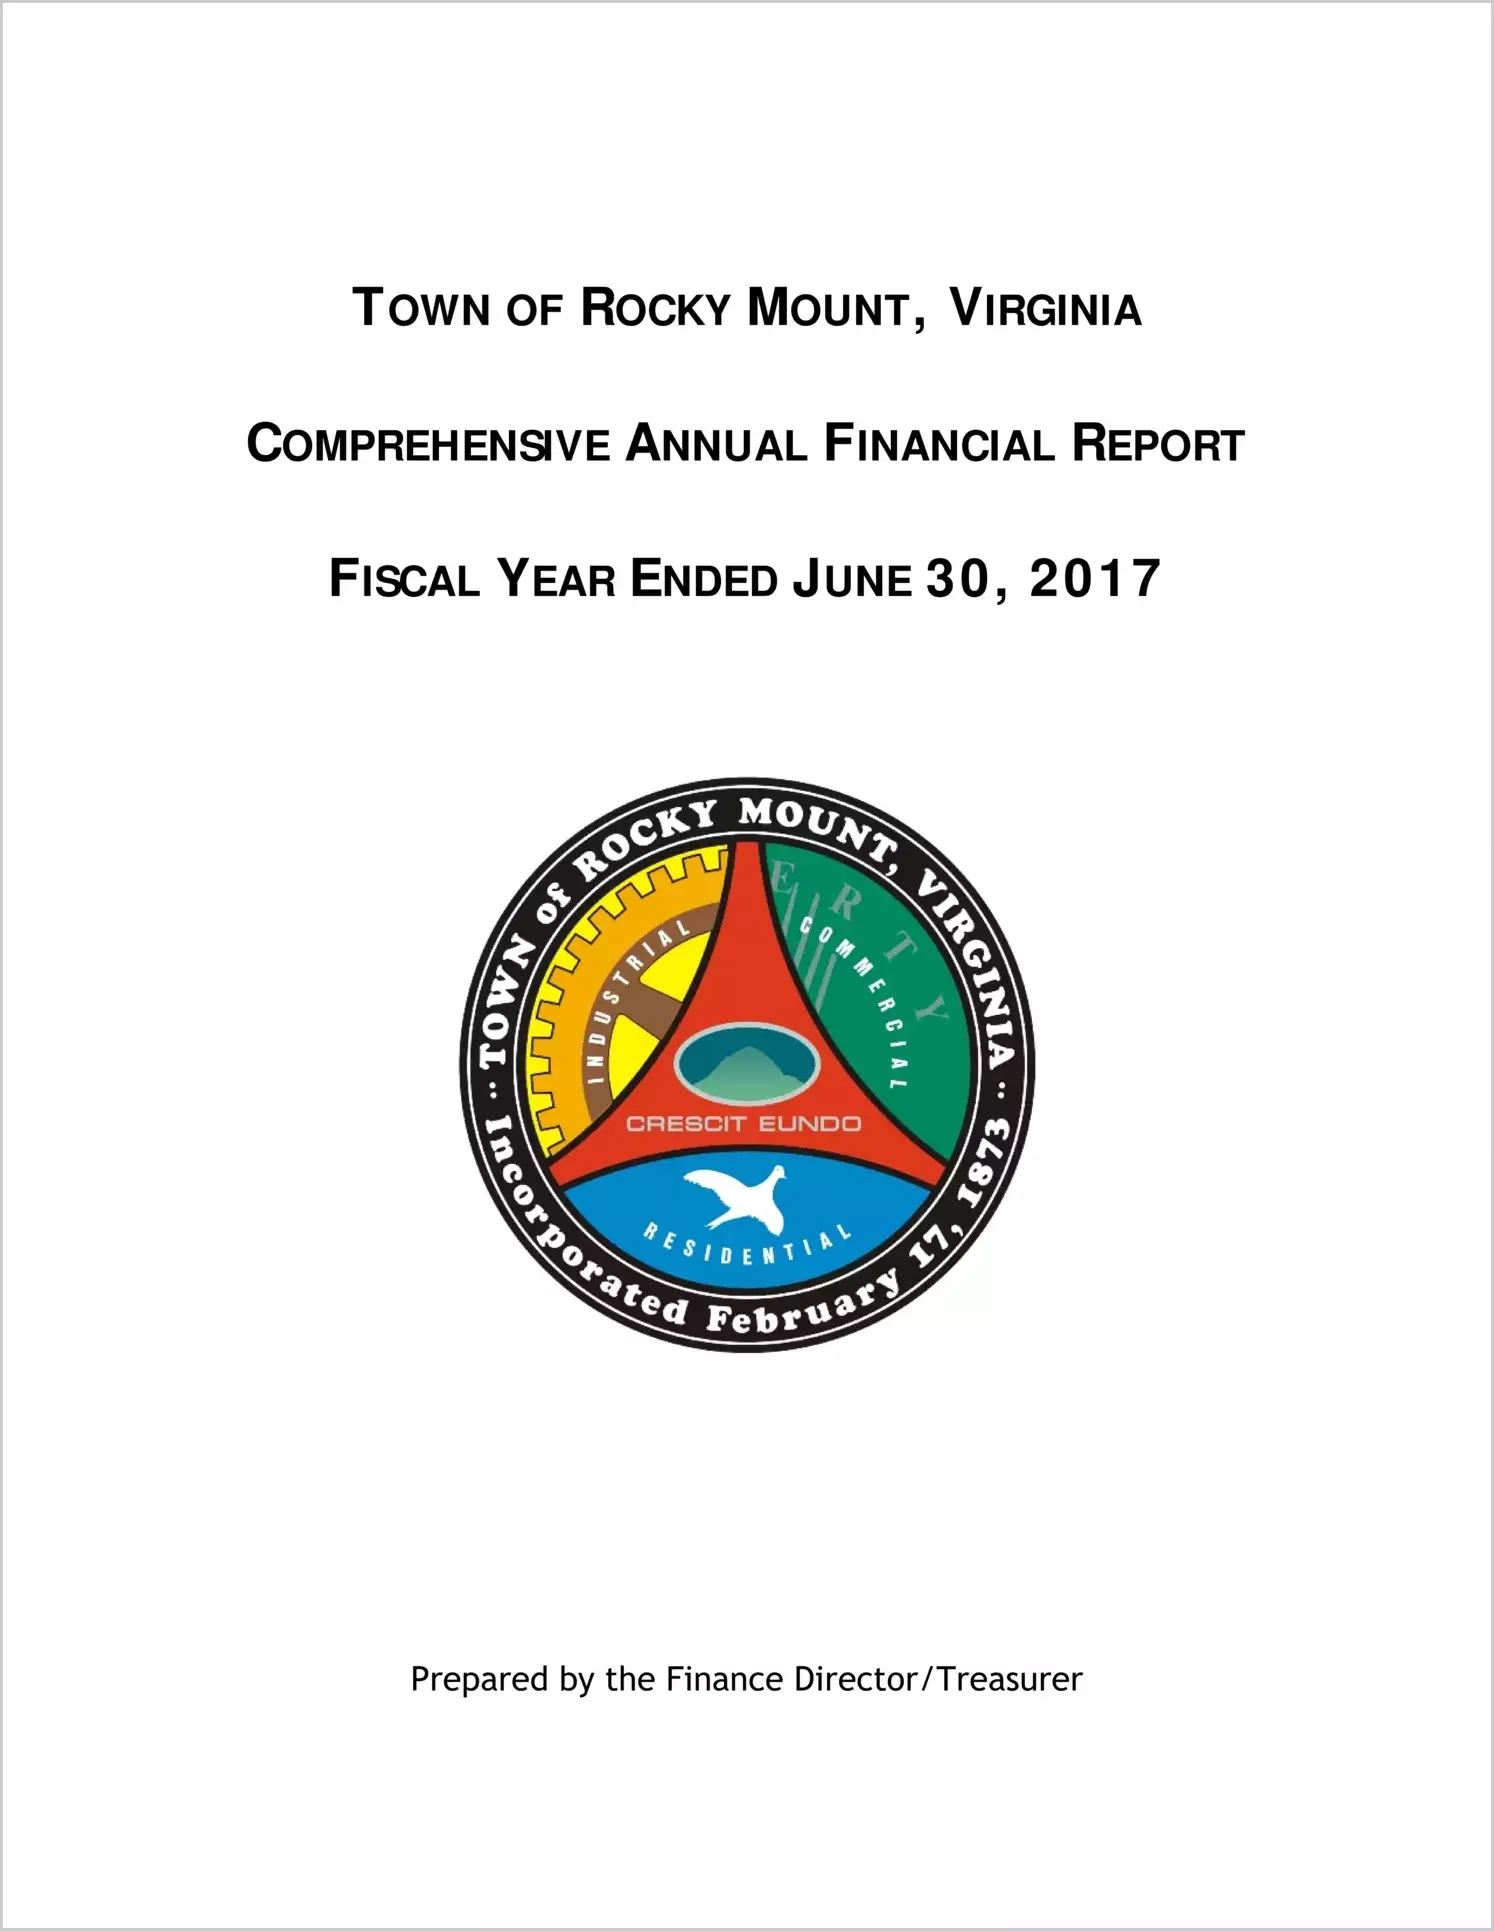 2017 Annual Financial Report for Town of Rocky Mount